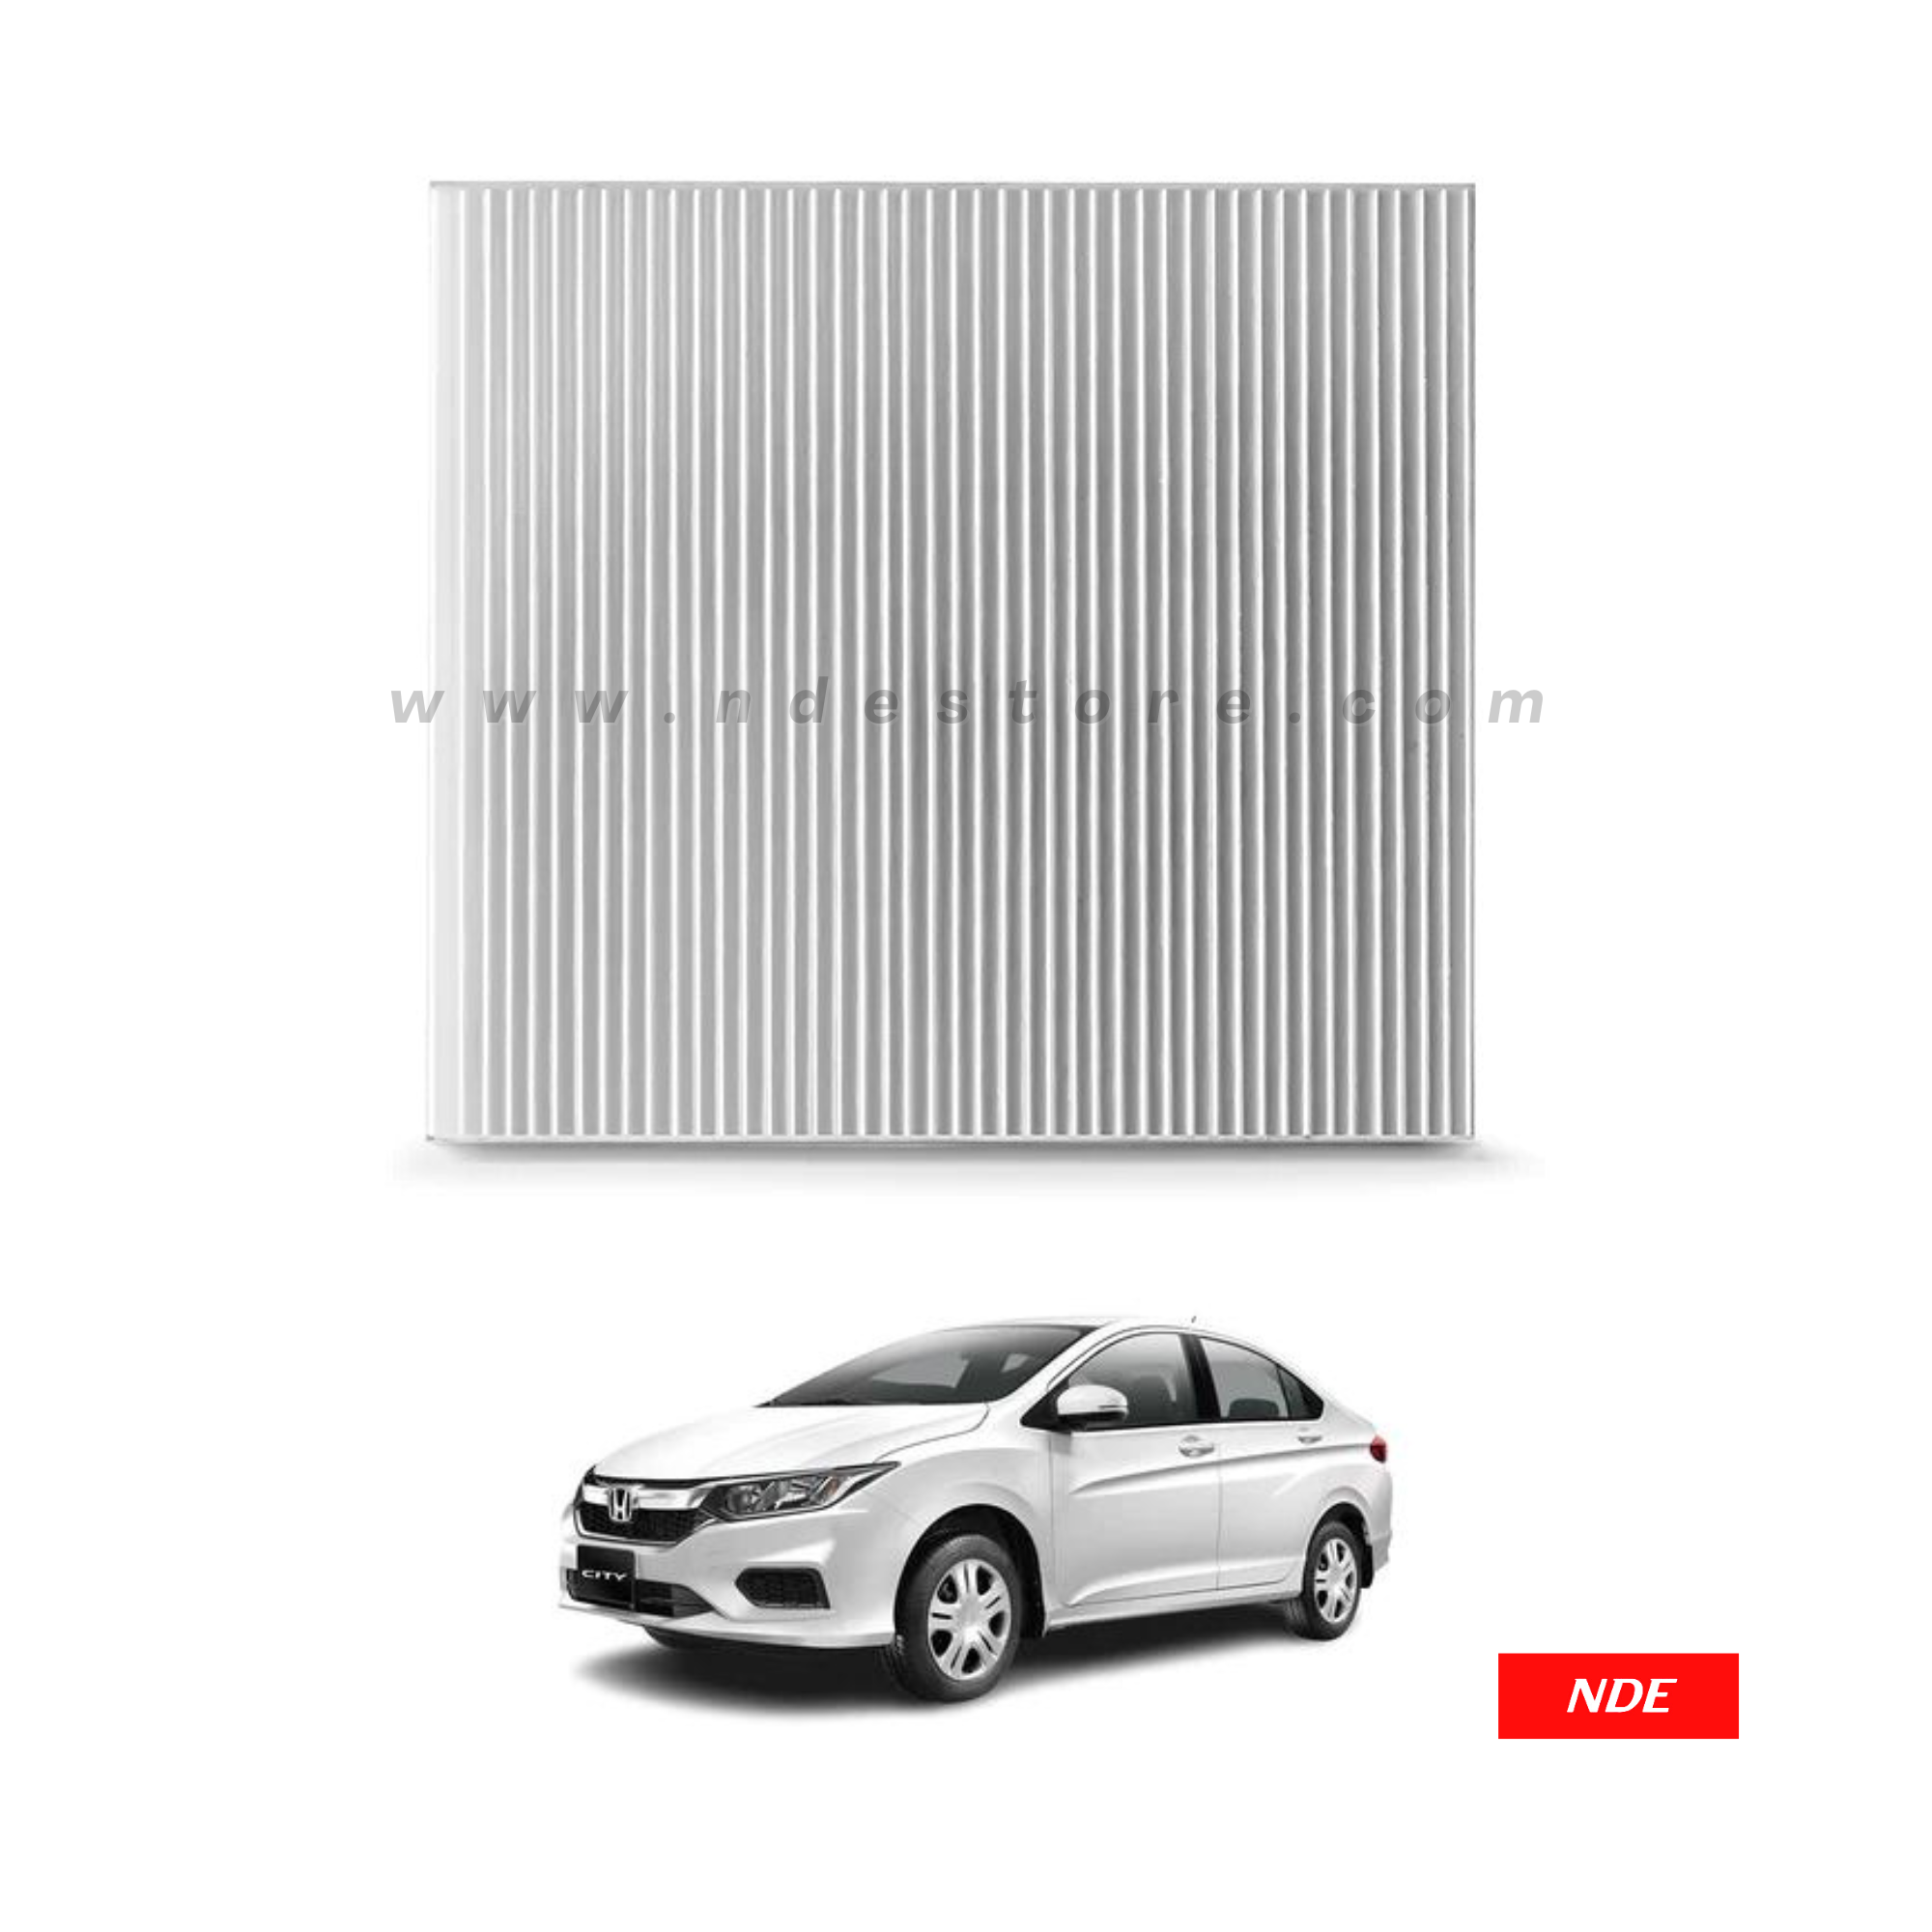 CABIN AIR FILTER / AC FILTER FOR HONDA CITY (IMPORTED)